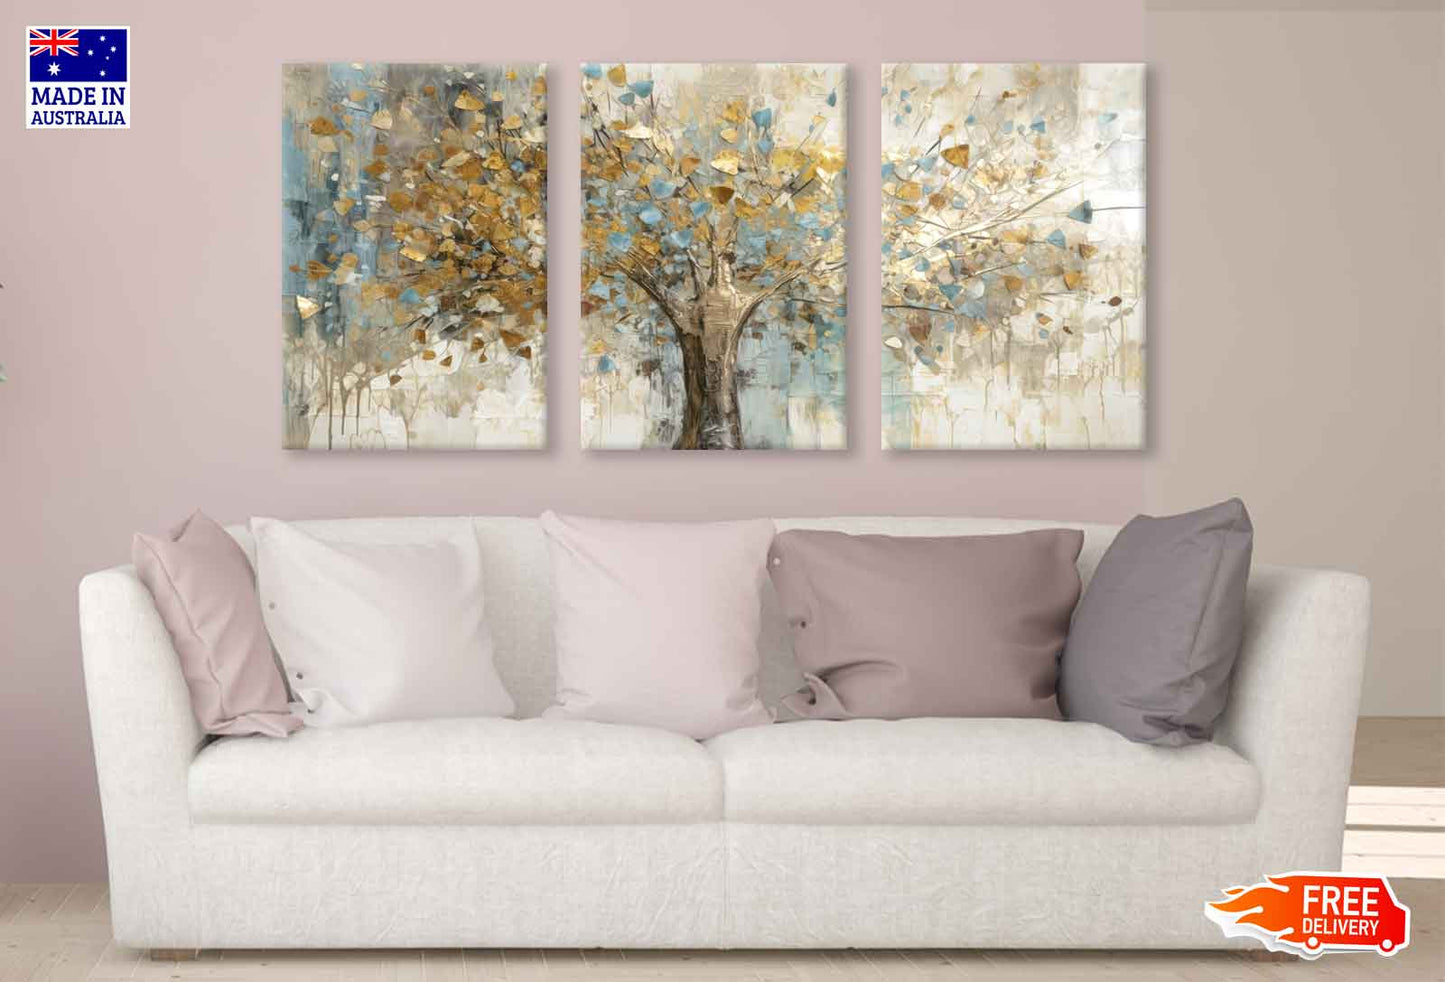 3 Set of Abstract Gold Tree High Quality Print 100% Australian Made Wall Canvas Ready to Hang